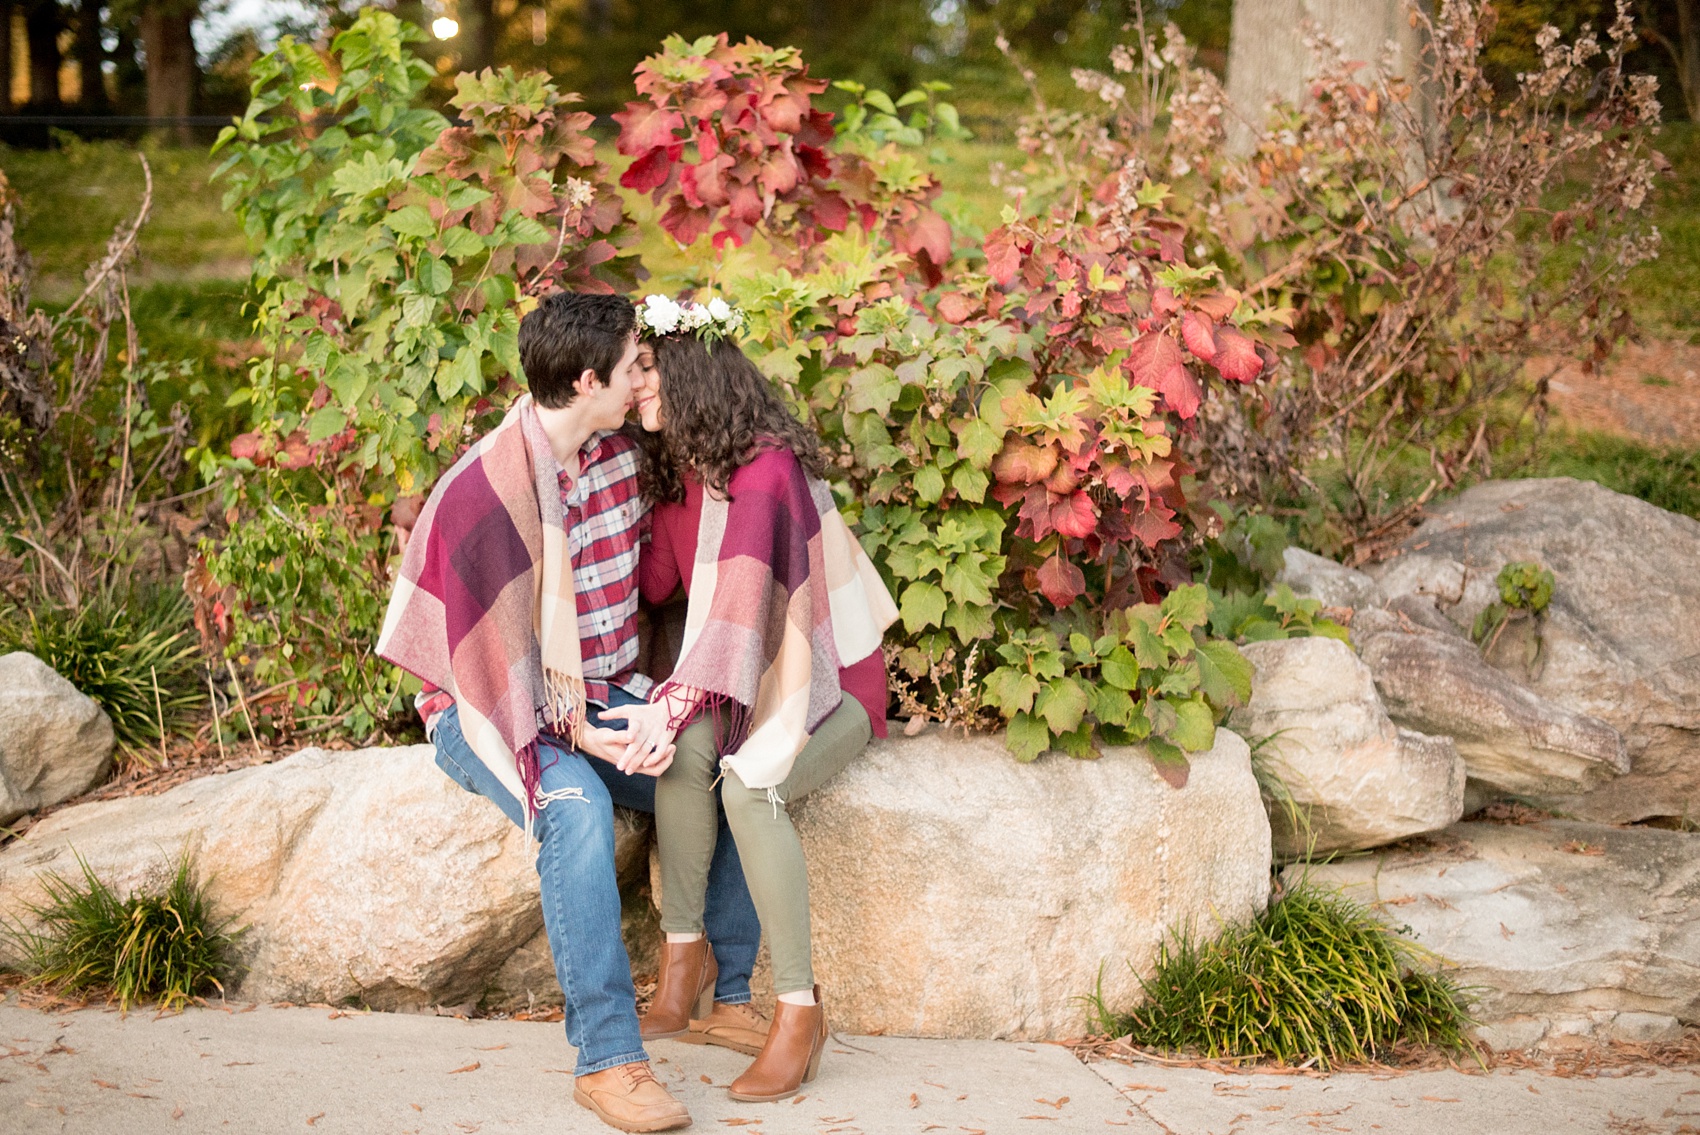 Mikkel Paige Photography photos of a Raleigh engagement session at Pullen Park. The bride and groom got cozy in a burgundy plaid blanket.